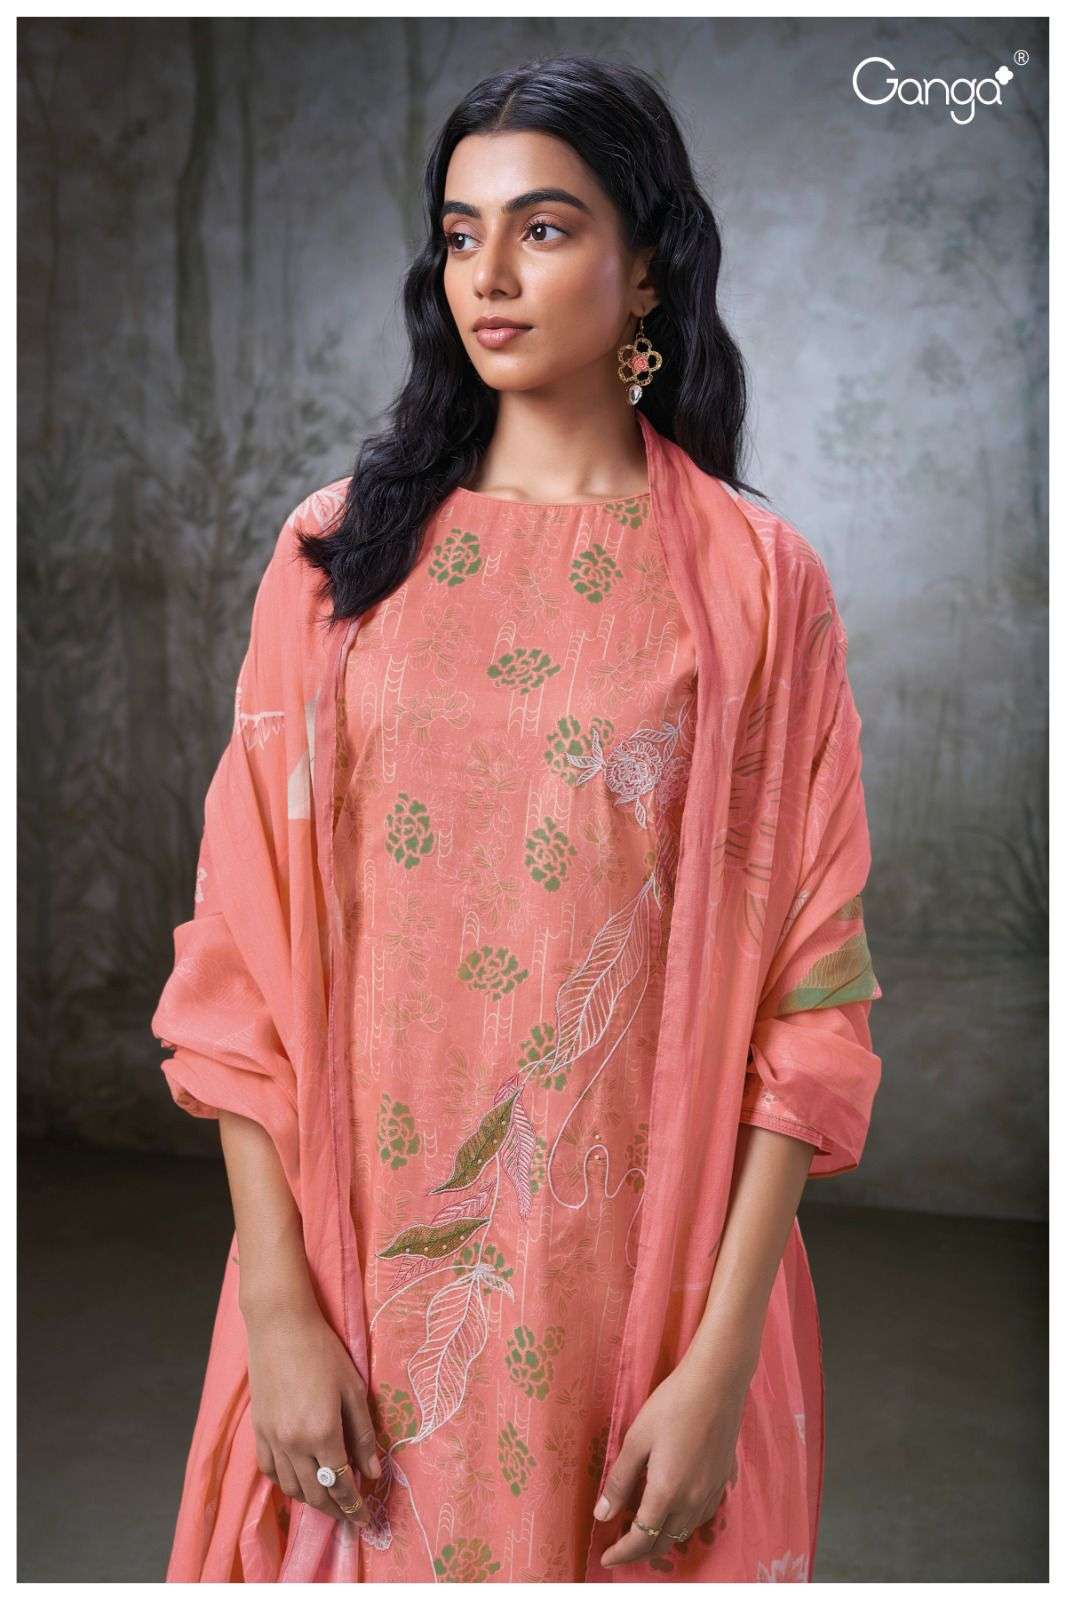 Ganga Cove 2246 Exclusive Ladies Wear Cotton Suit Summer Collection